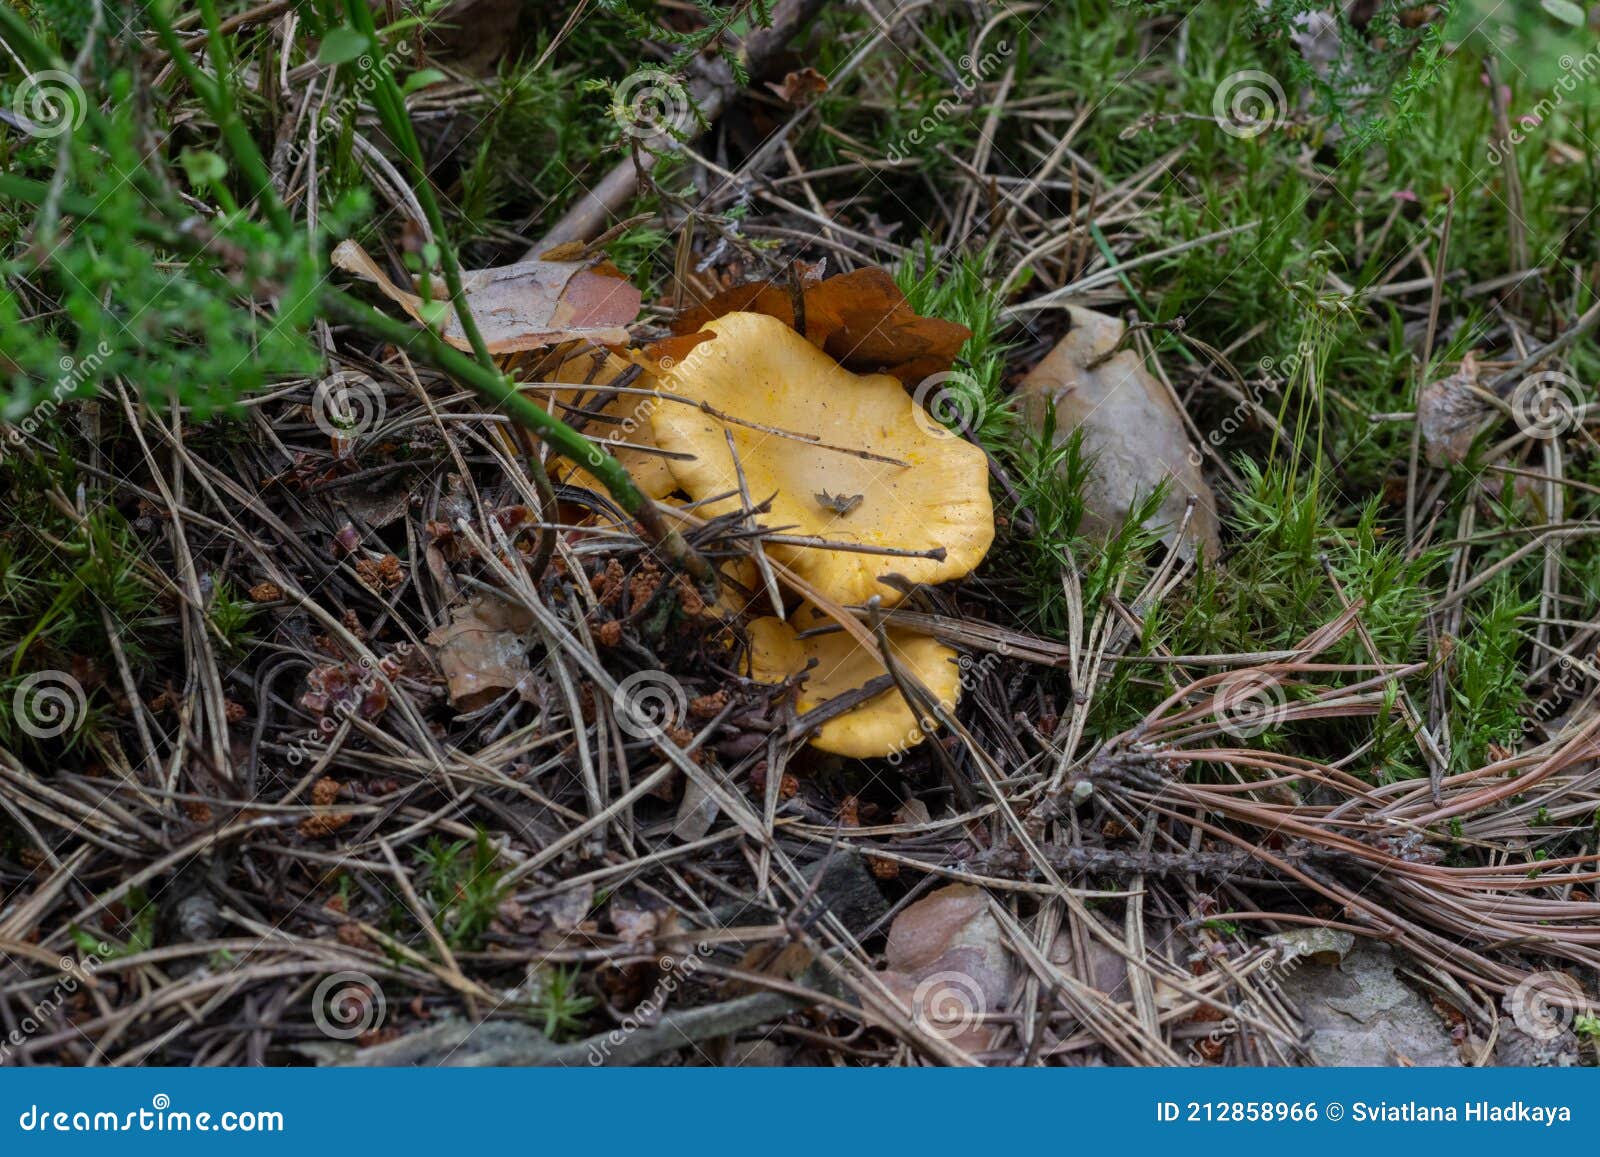 Small Red Chanterelle Mushrooms Hide in Moss, Fallen Needles and